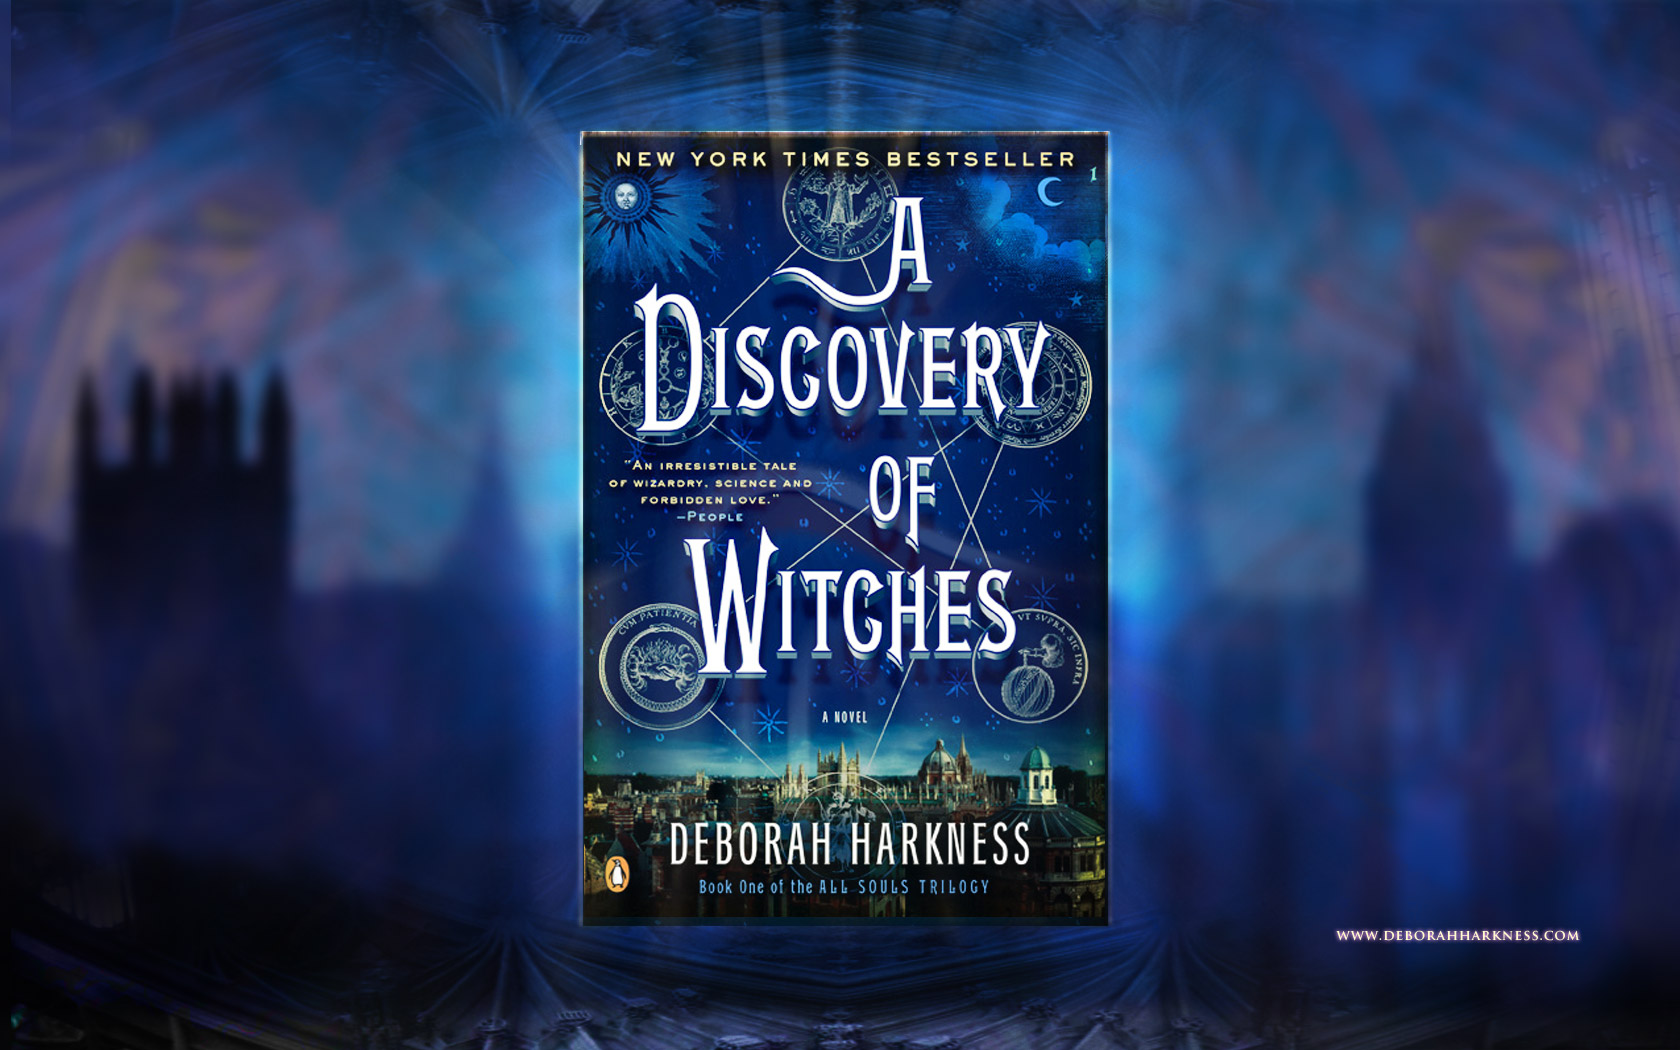 discovery-of-witches-Tv-show